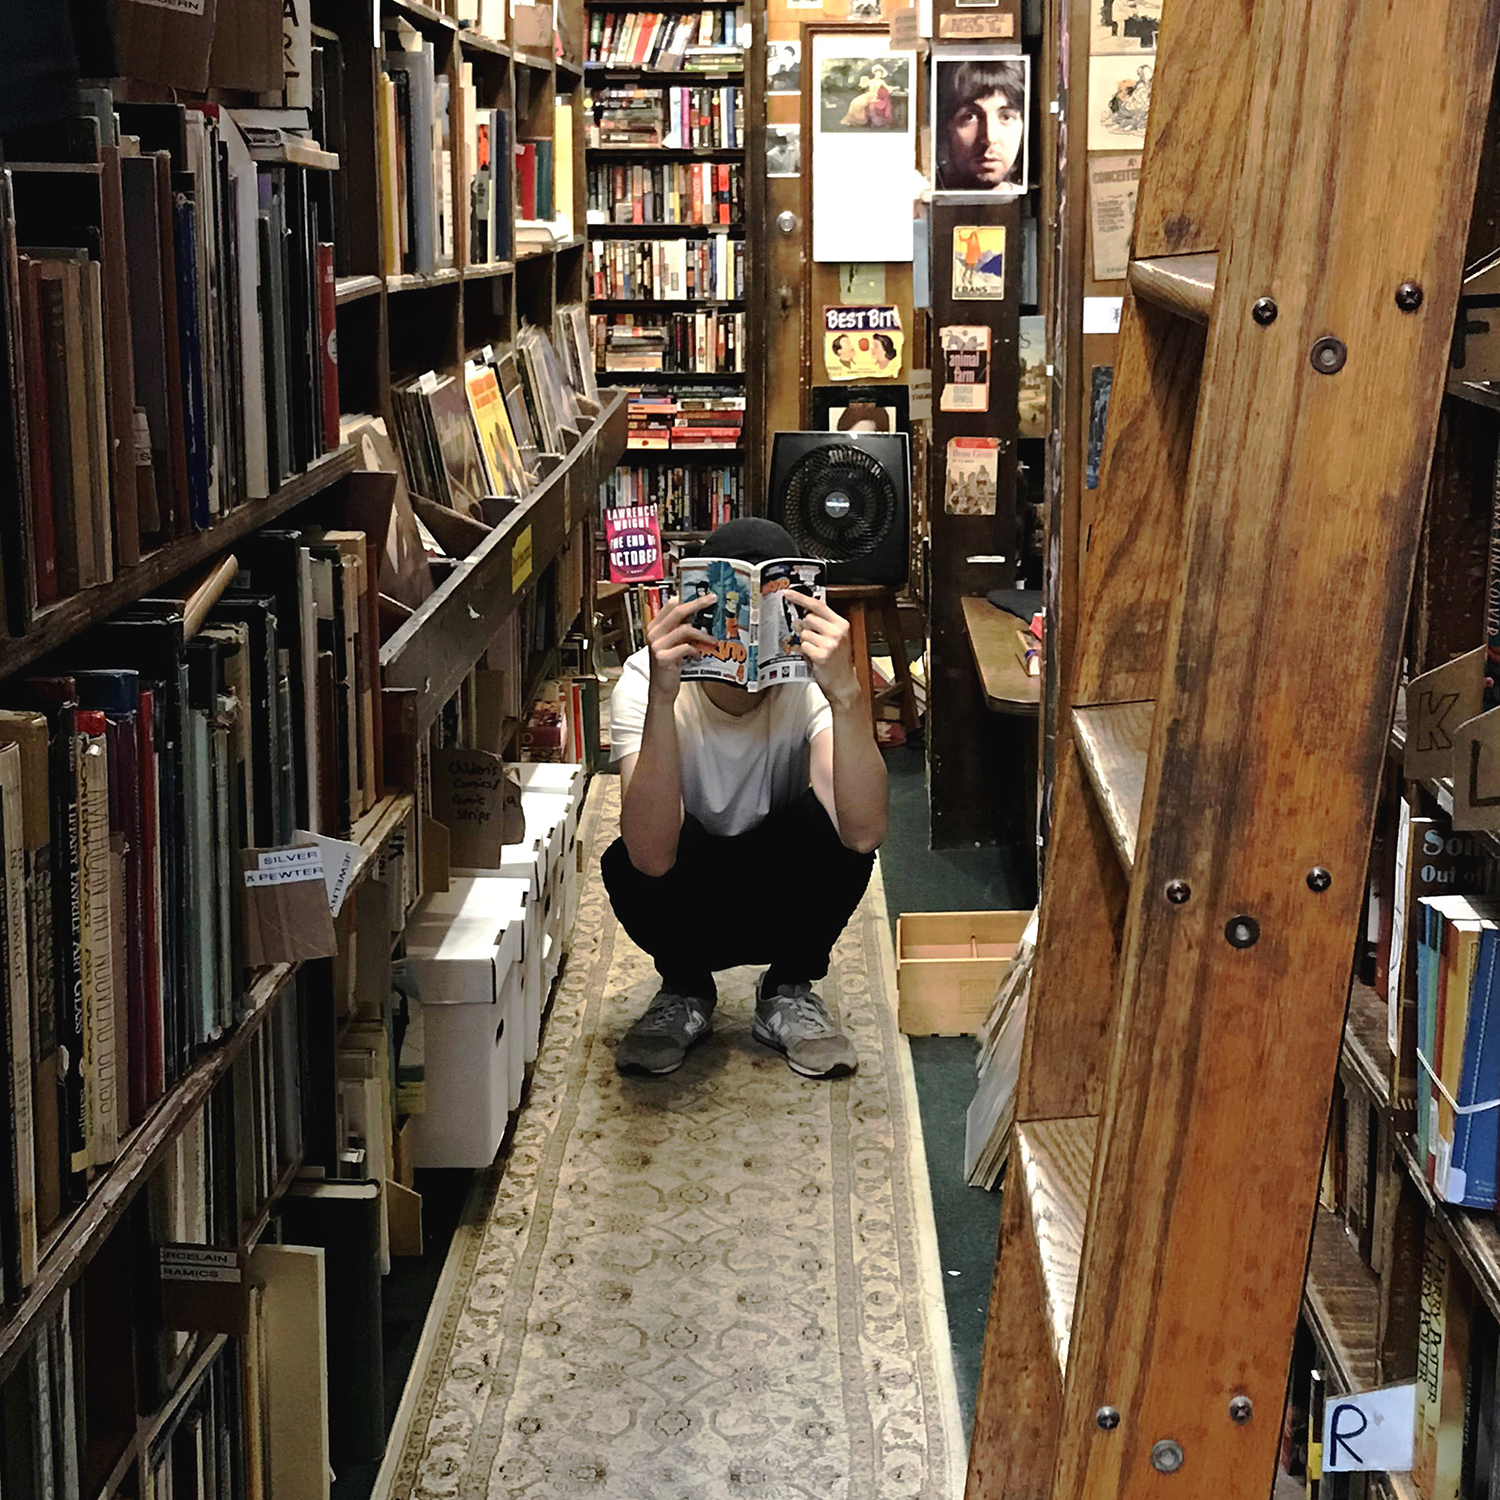 person squatting between bookshelves while holding up a book to his face